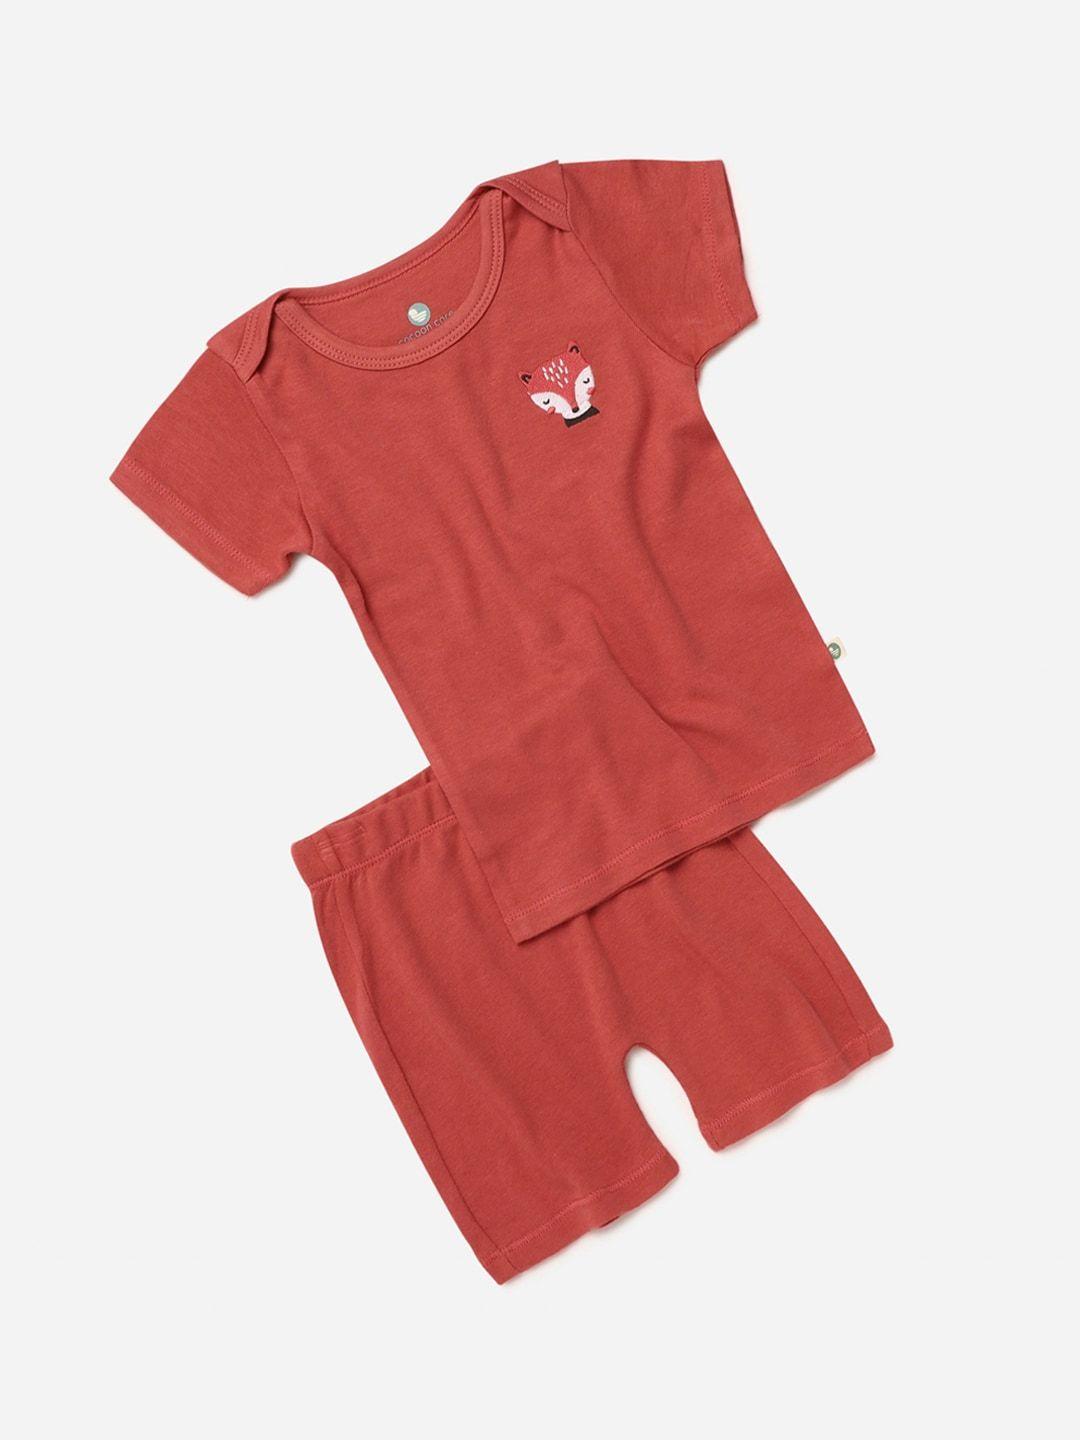 cocoon care Unisex Kids Red Sustainable Clothing Set